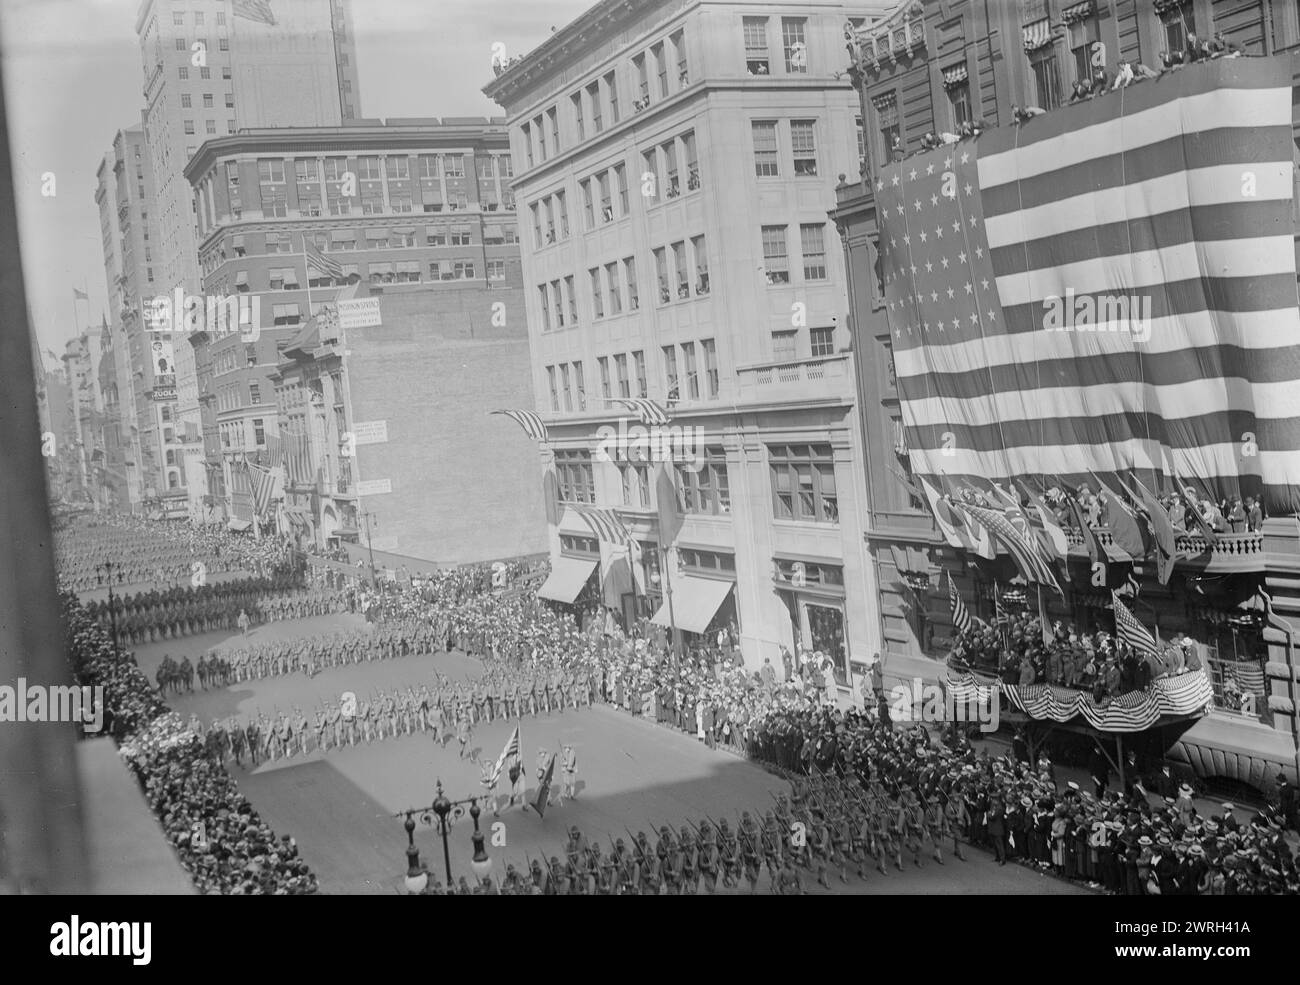 7th Regt. Departs, 11 Sept 1917. The 7th Regiment, New York National Guard (later the 107th Infantry Regiment), looking north on 5th toward E. 40th St., New York City, marching in a parade on September 11, 1917, prior to their departure to a camp in Spartanburg, South Carolina, and then to the war in Europe. The reviewing stand, at right, was at the Union League Club, then at E. 39th and 5th Ave. Stock Photo